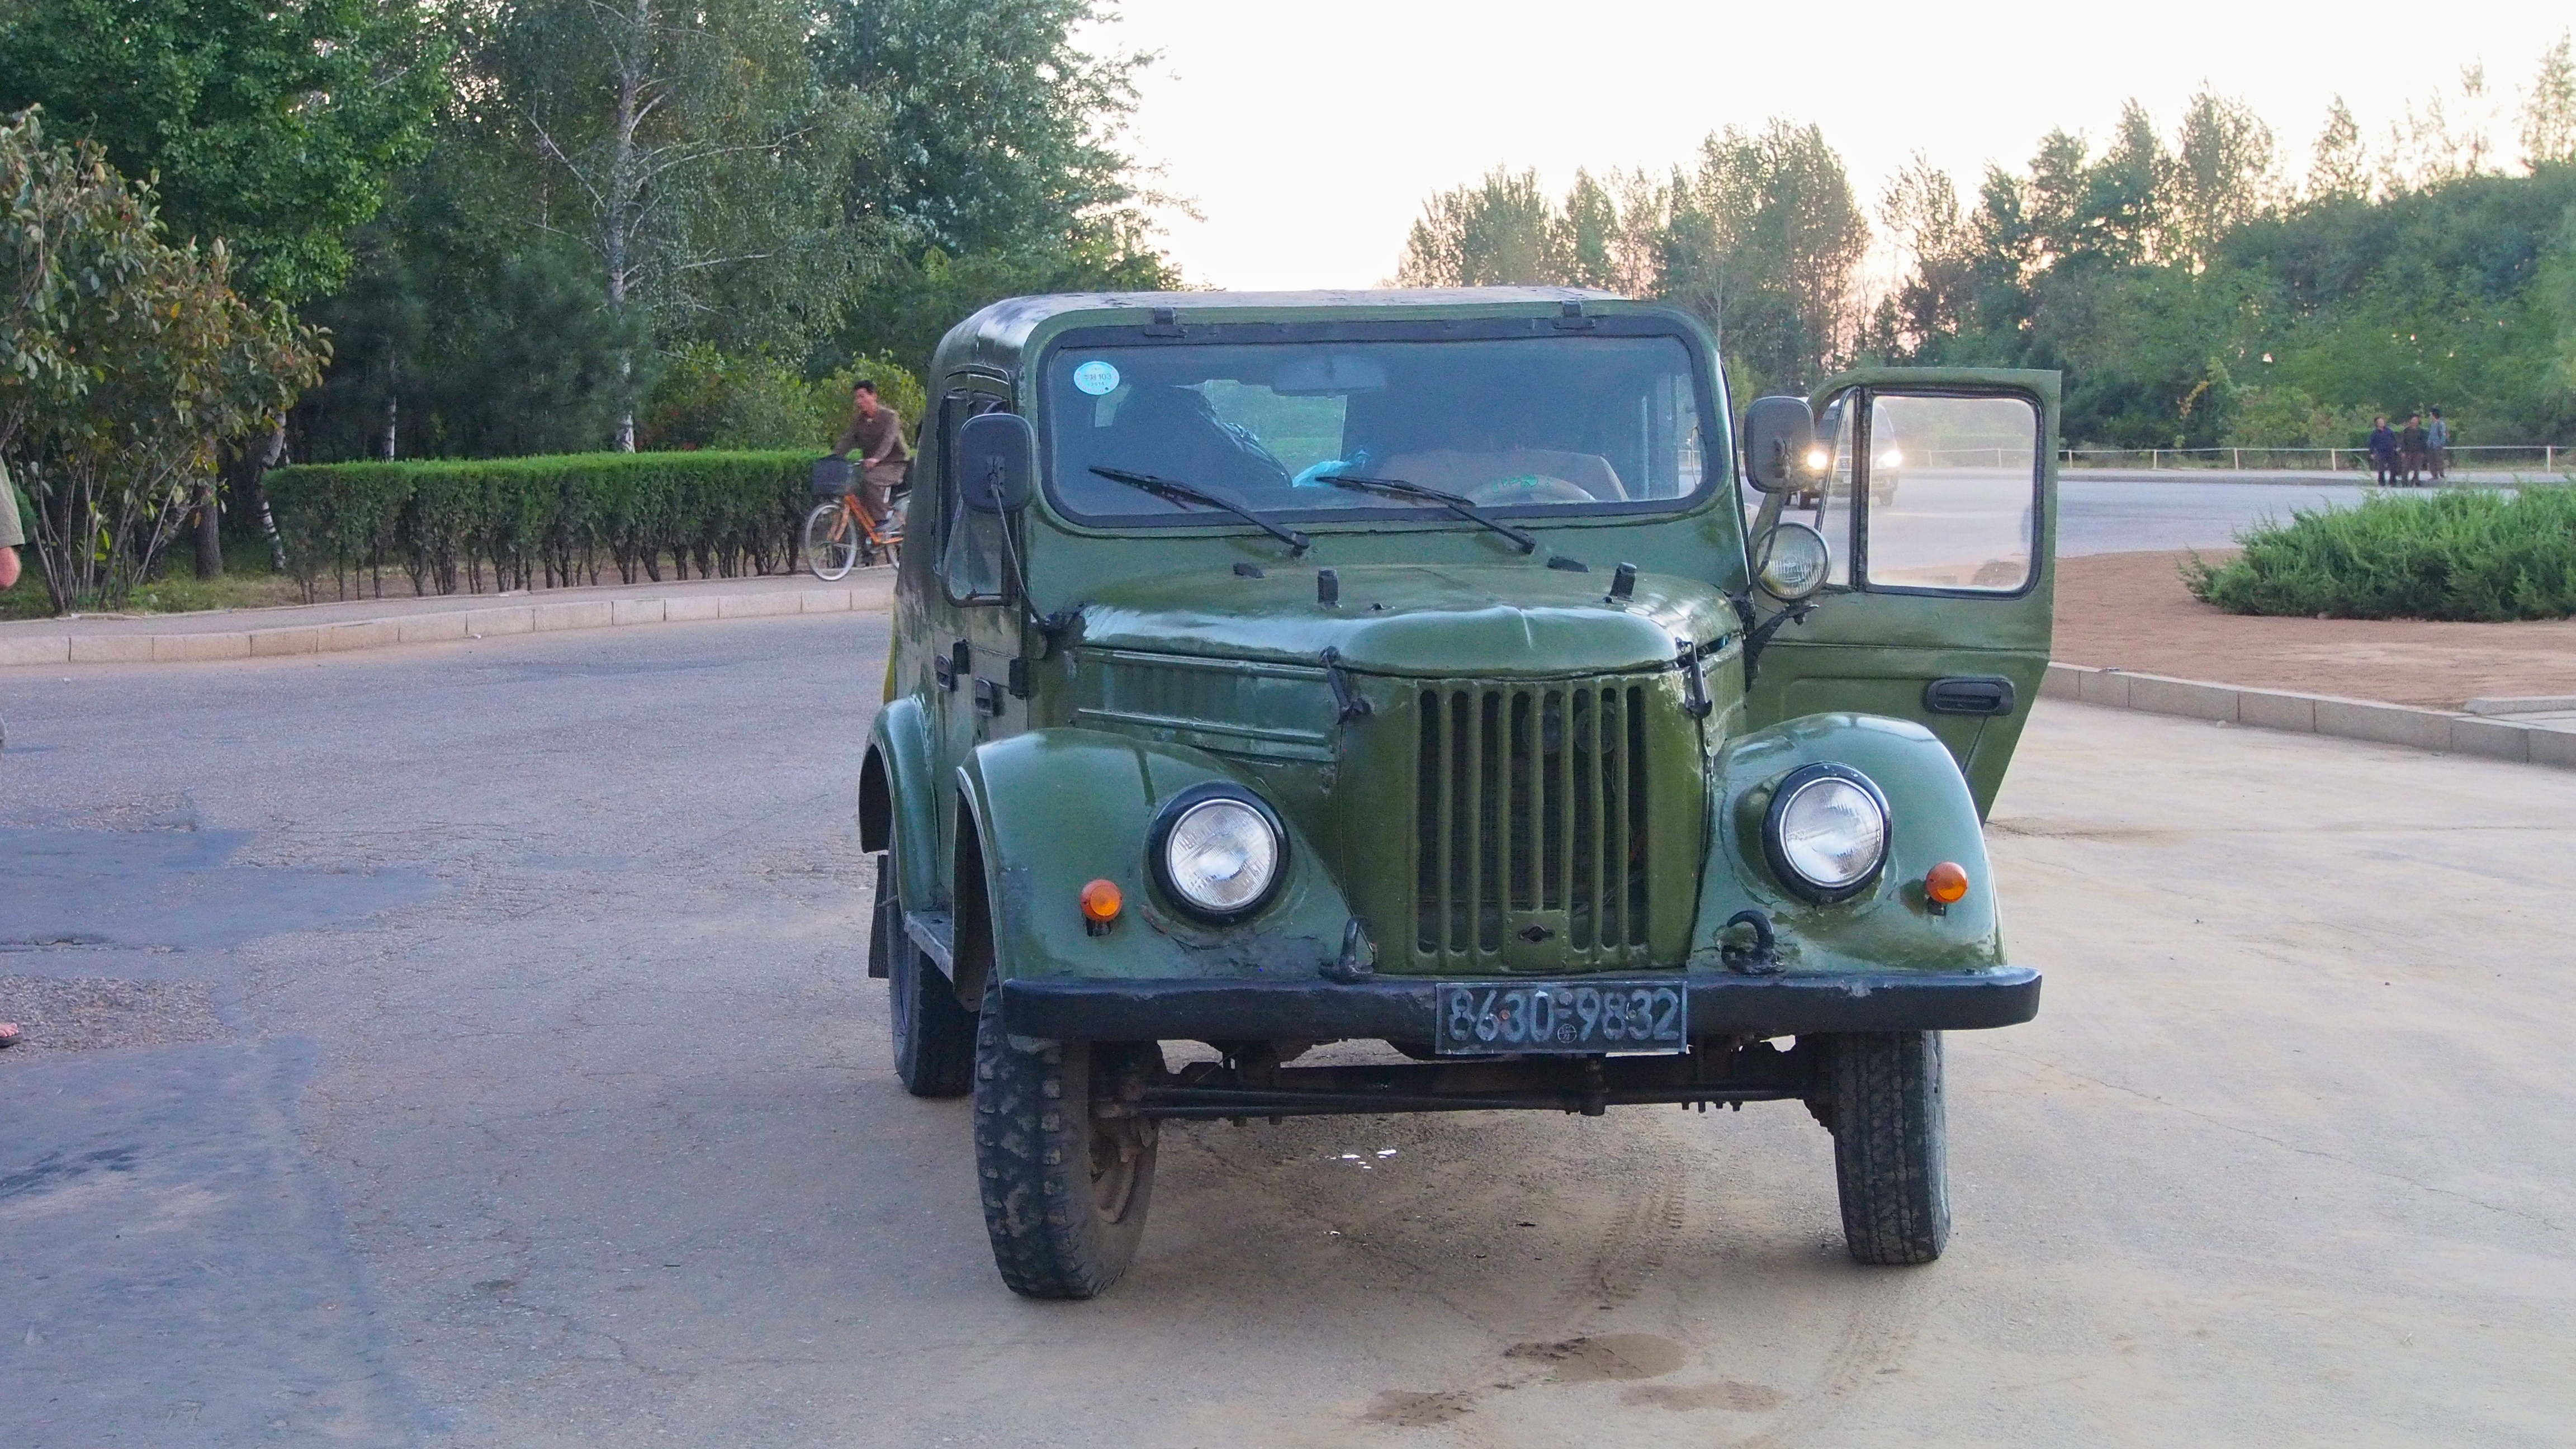 File:Old jeep, at Sariwon DPRK (14015033988).jpg - Wikimedia Commons